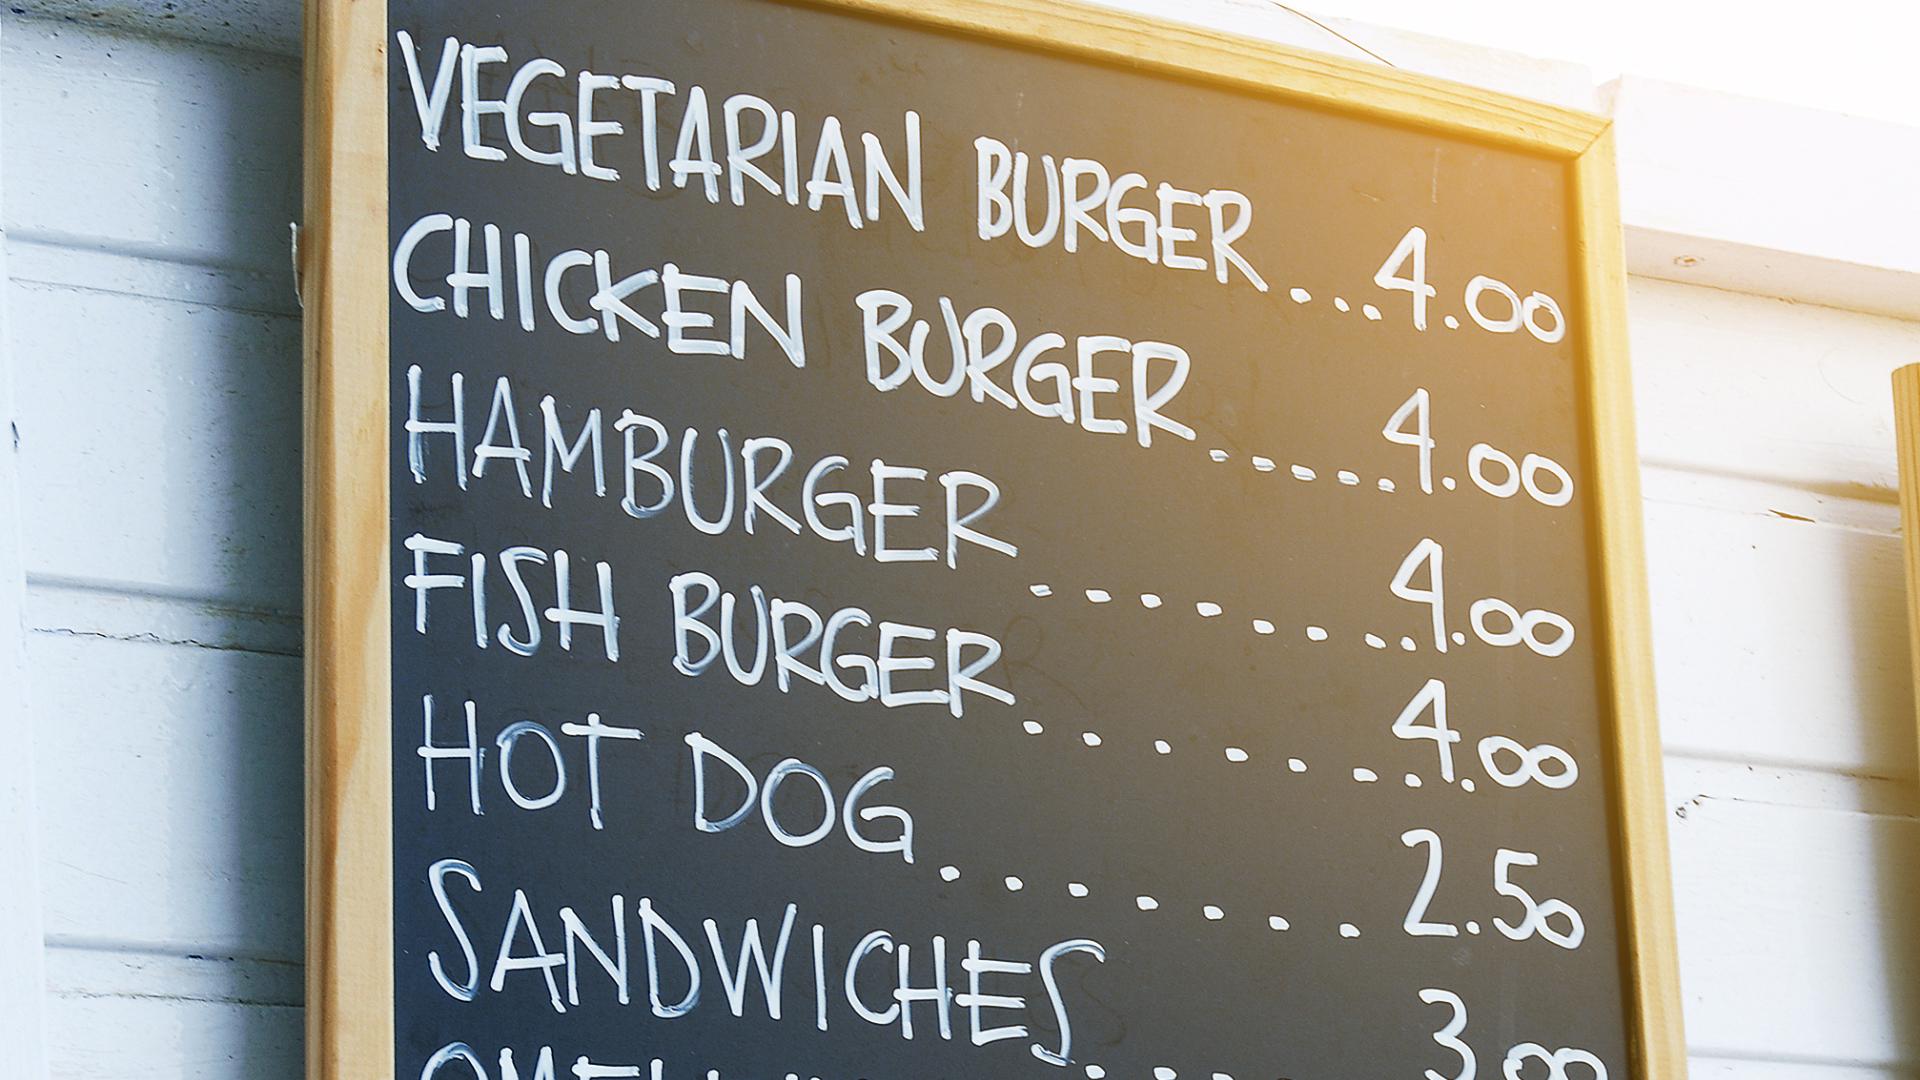 food prices in a restaurant's menu